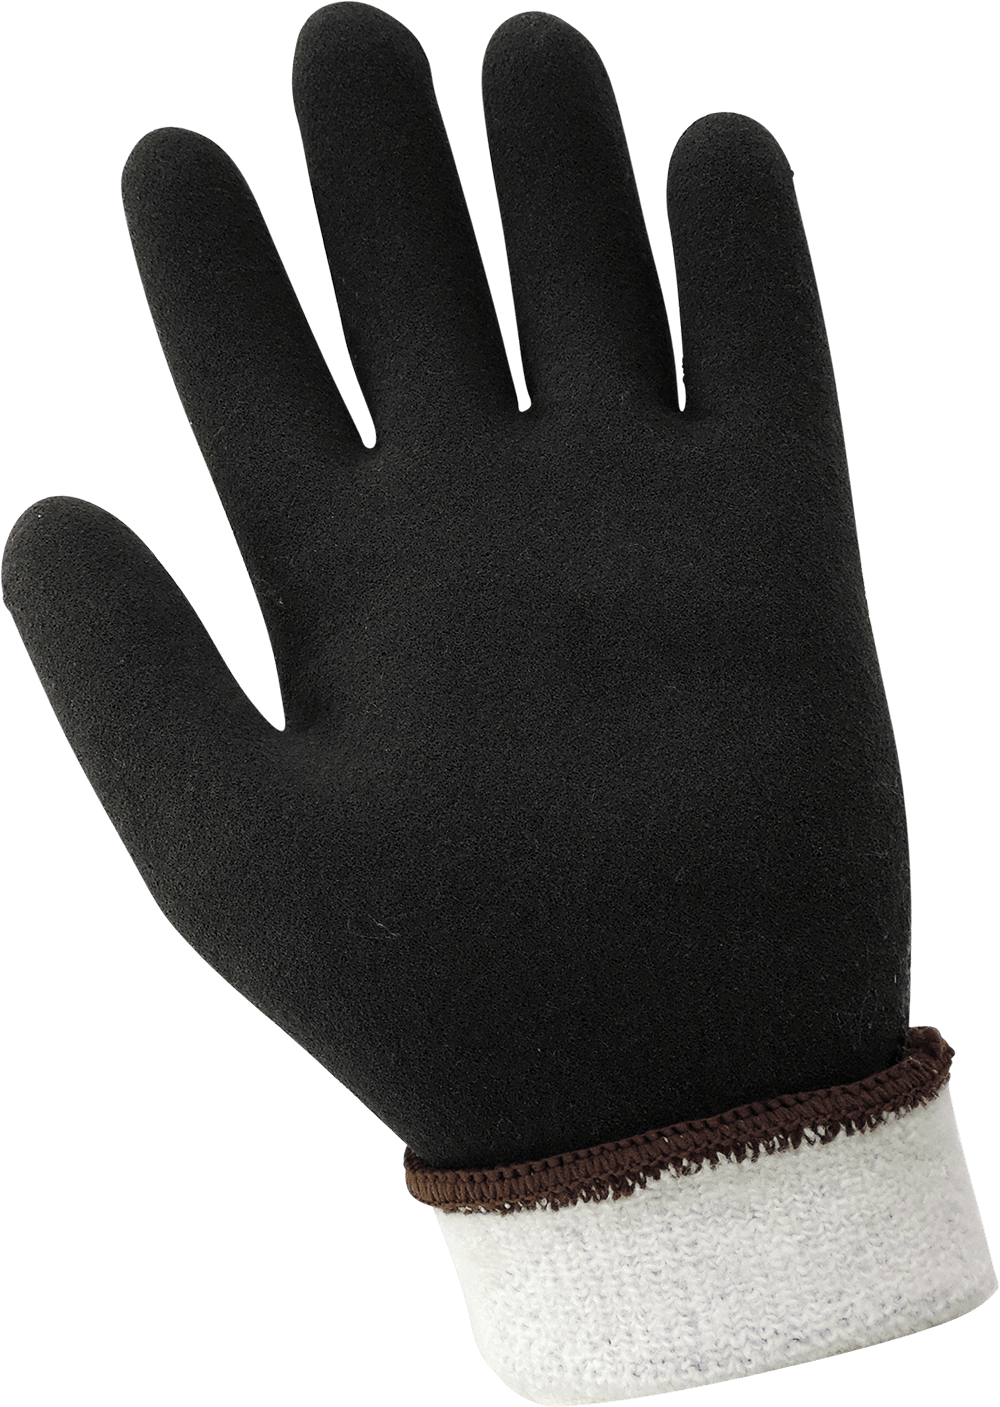 Global Gloves Samurai Cut-Resistant Low-Temperature Gloves from Columbia Safety